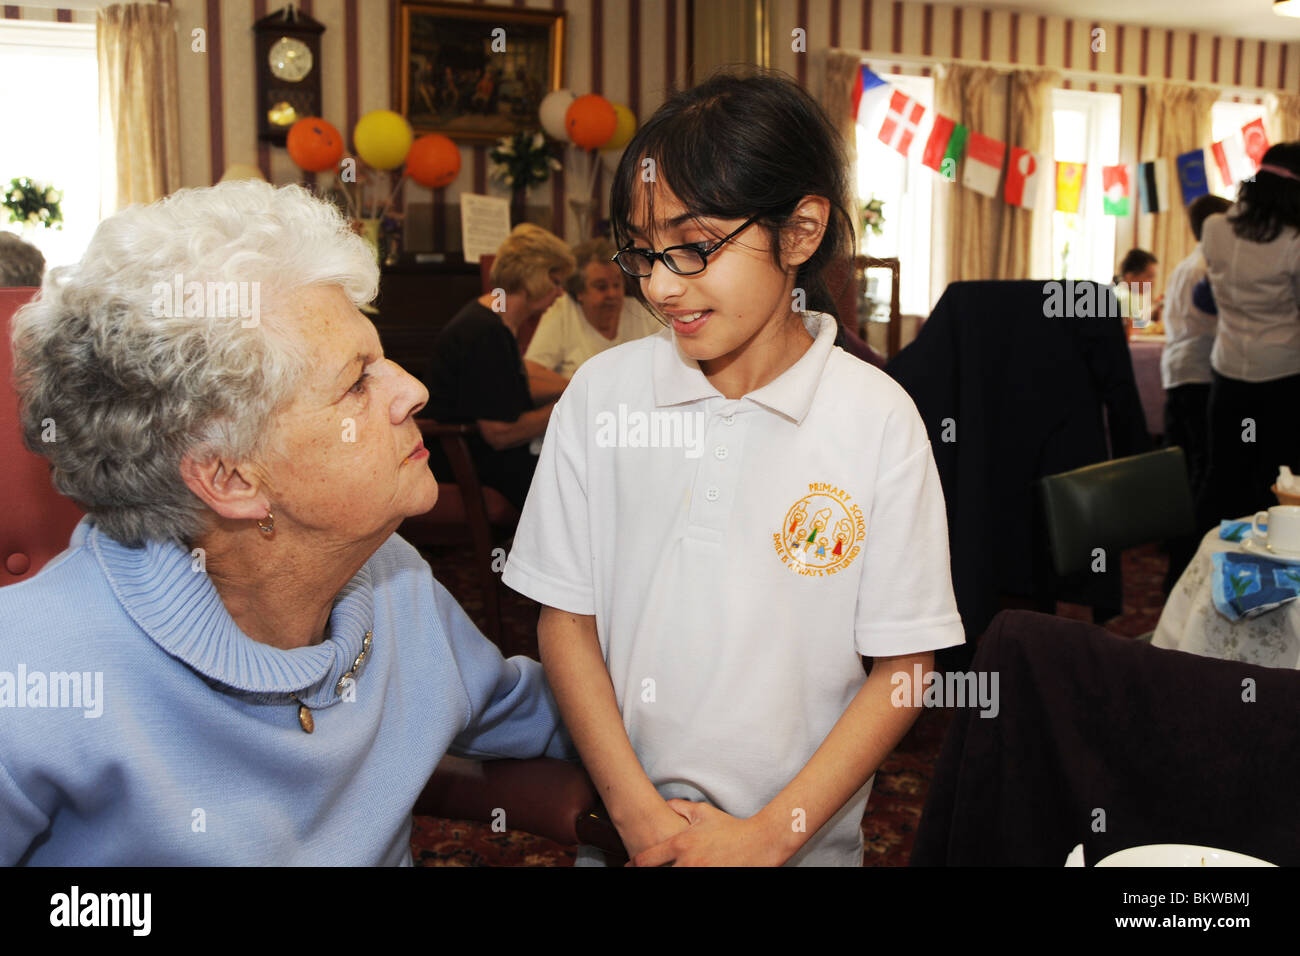 Primary School children meet elderly people at their residential home as part of a 'meet the neighbor' inter generational scheme Stock Photo